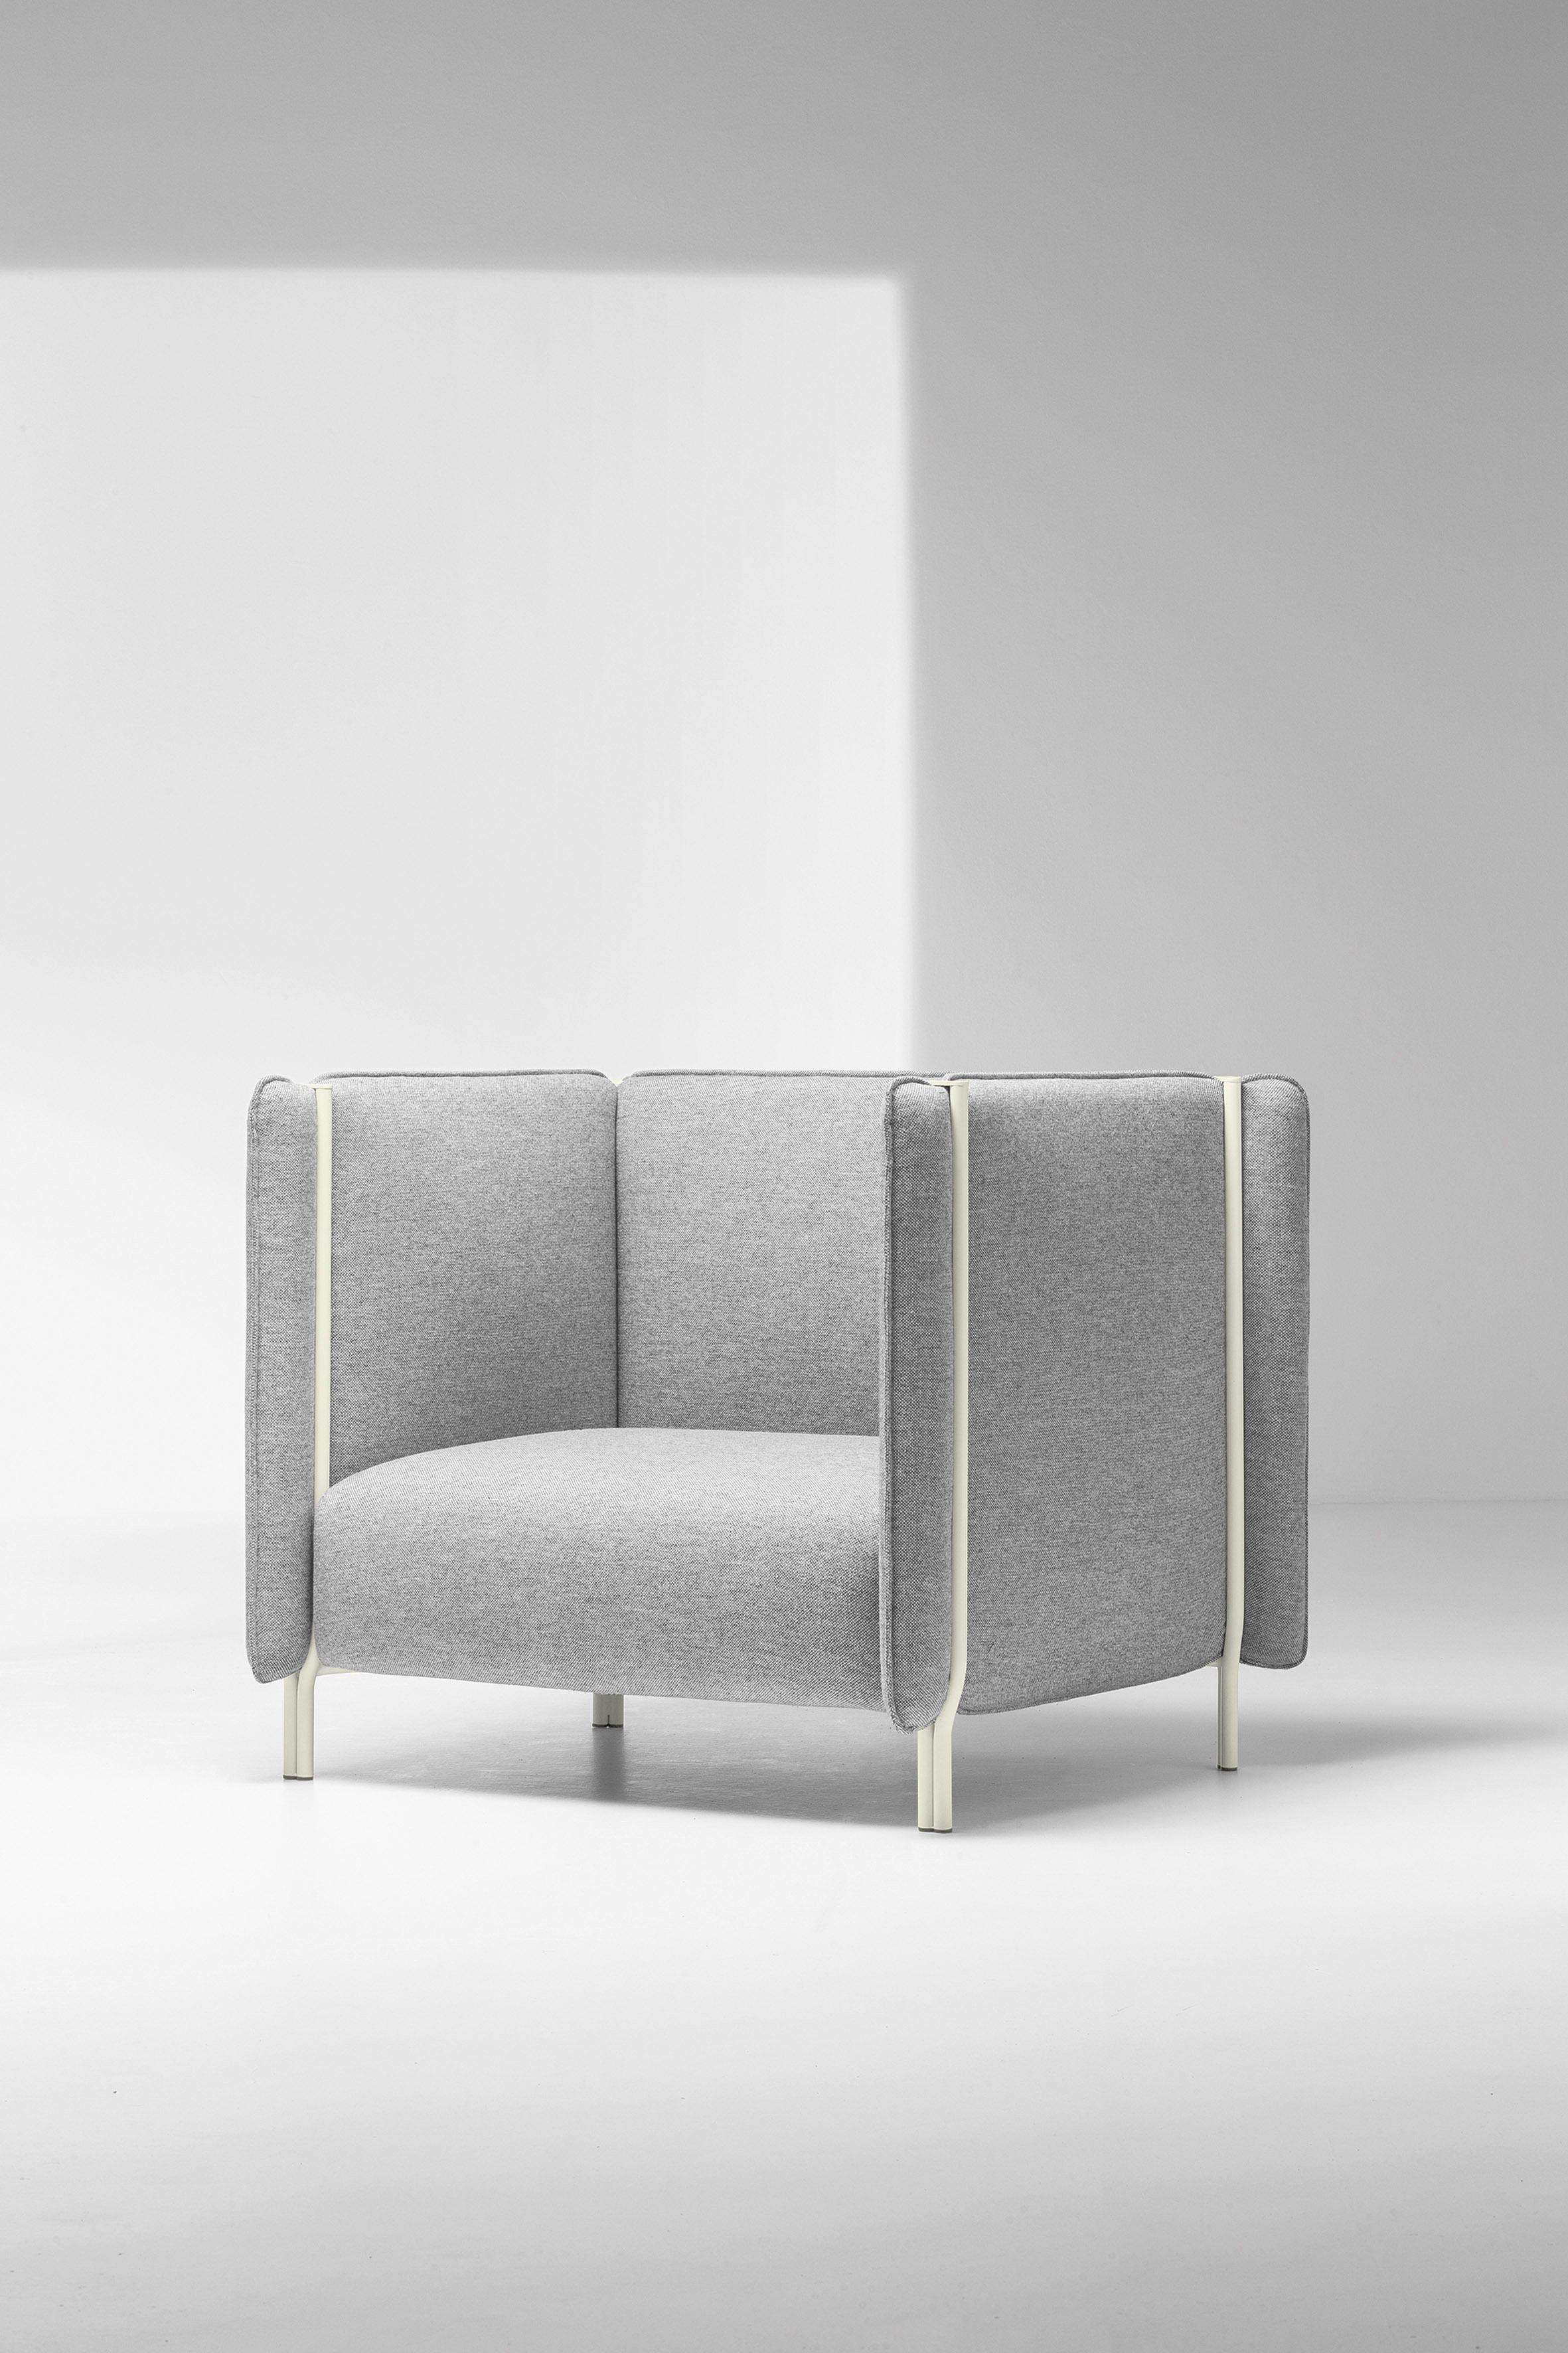 The Pinch selection stems from reflection on materials and the construction techniques in contemporary padded seating. The structures of Pinch sofas and armchairs literally “pinch” the backrests and armrests: the volumes are redistributed and the